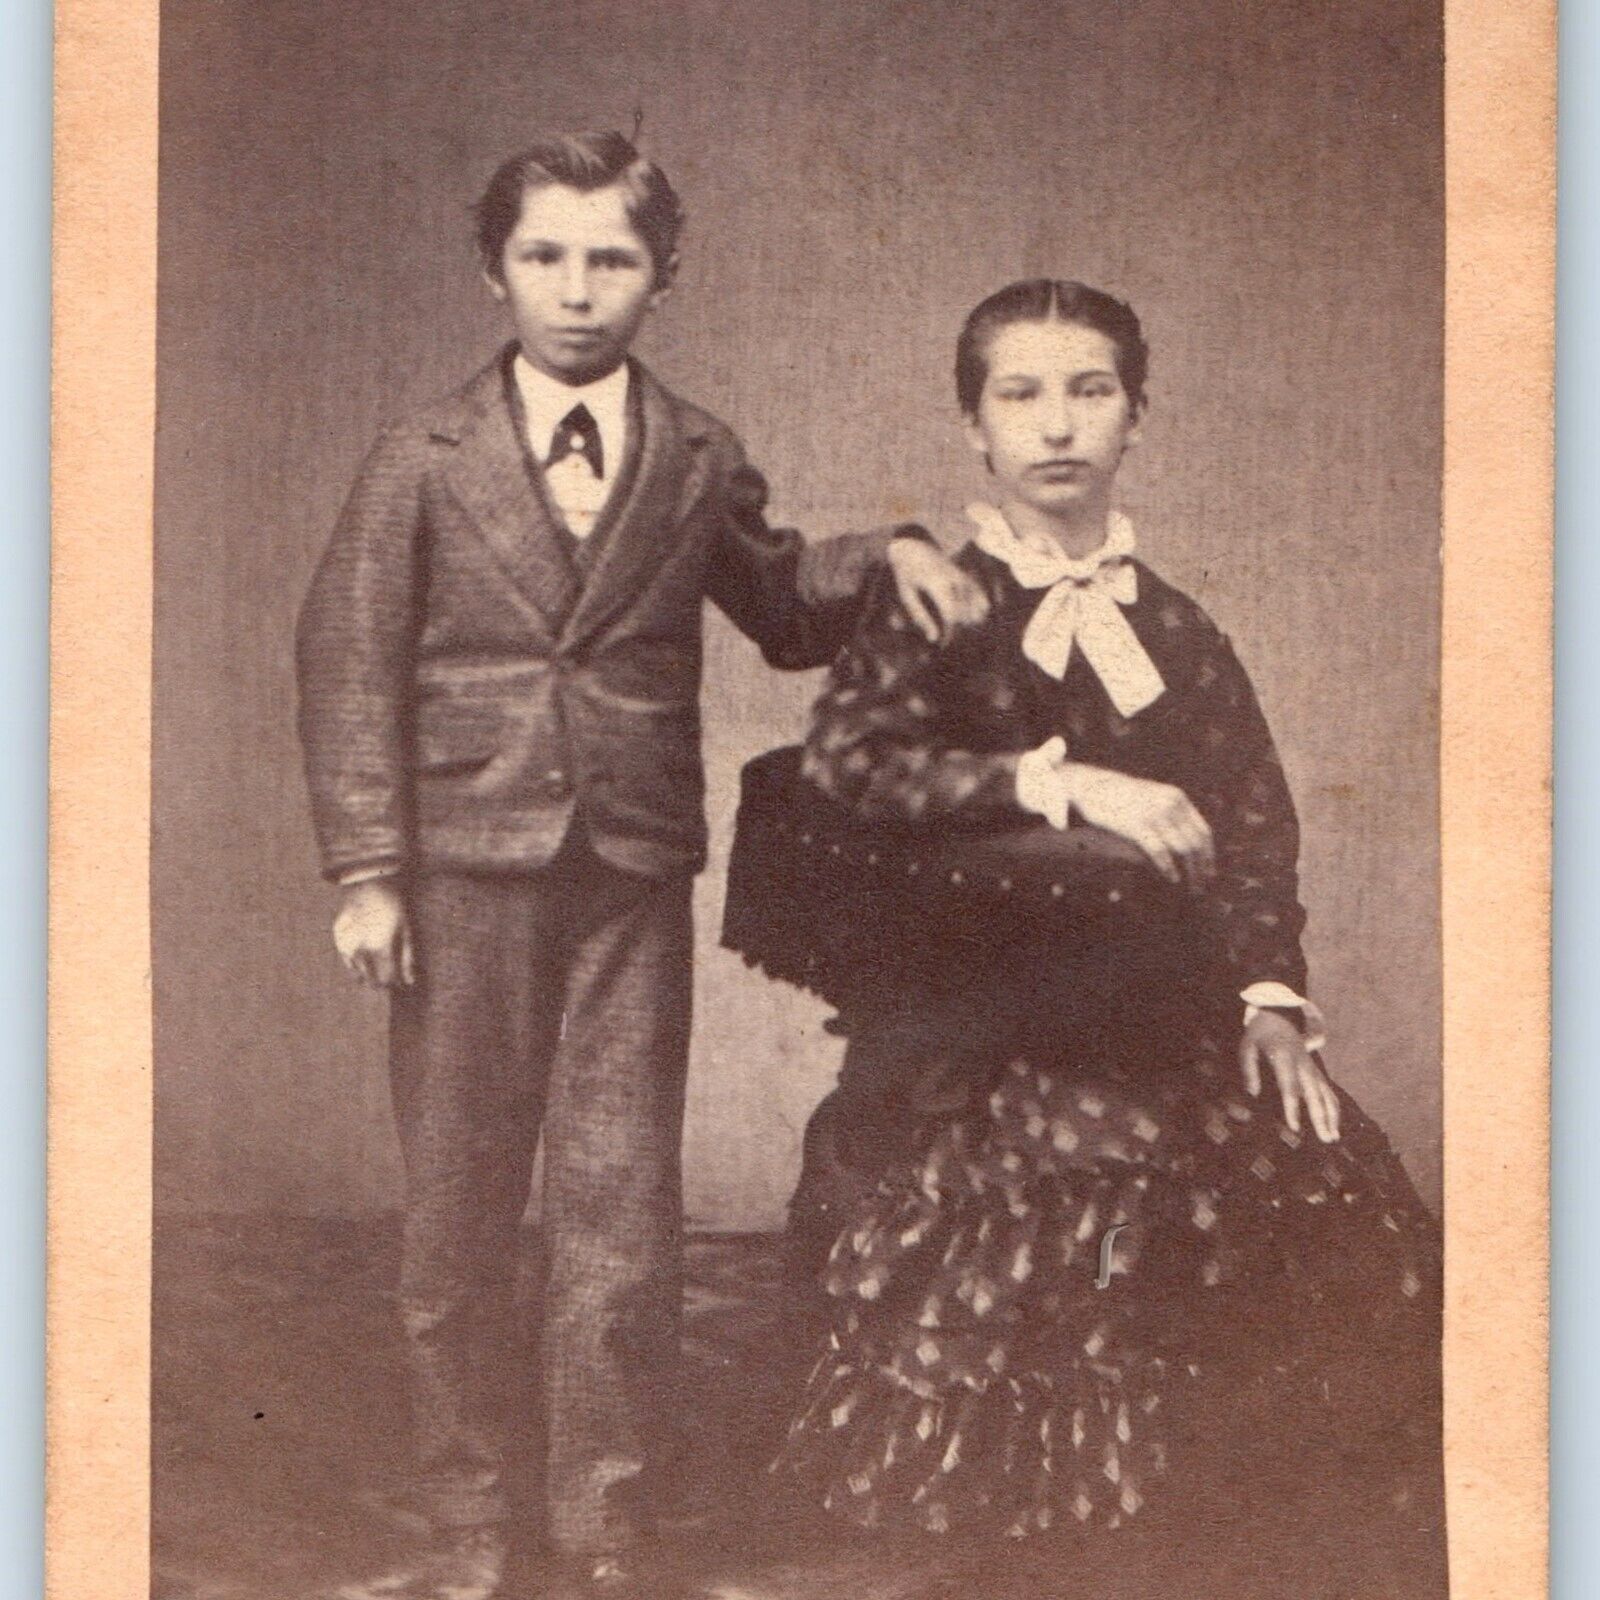 c1870s Nice Handsome Brother and Cute Sister Sibling CdV Photo Card Mature H27